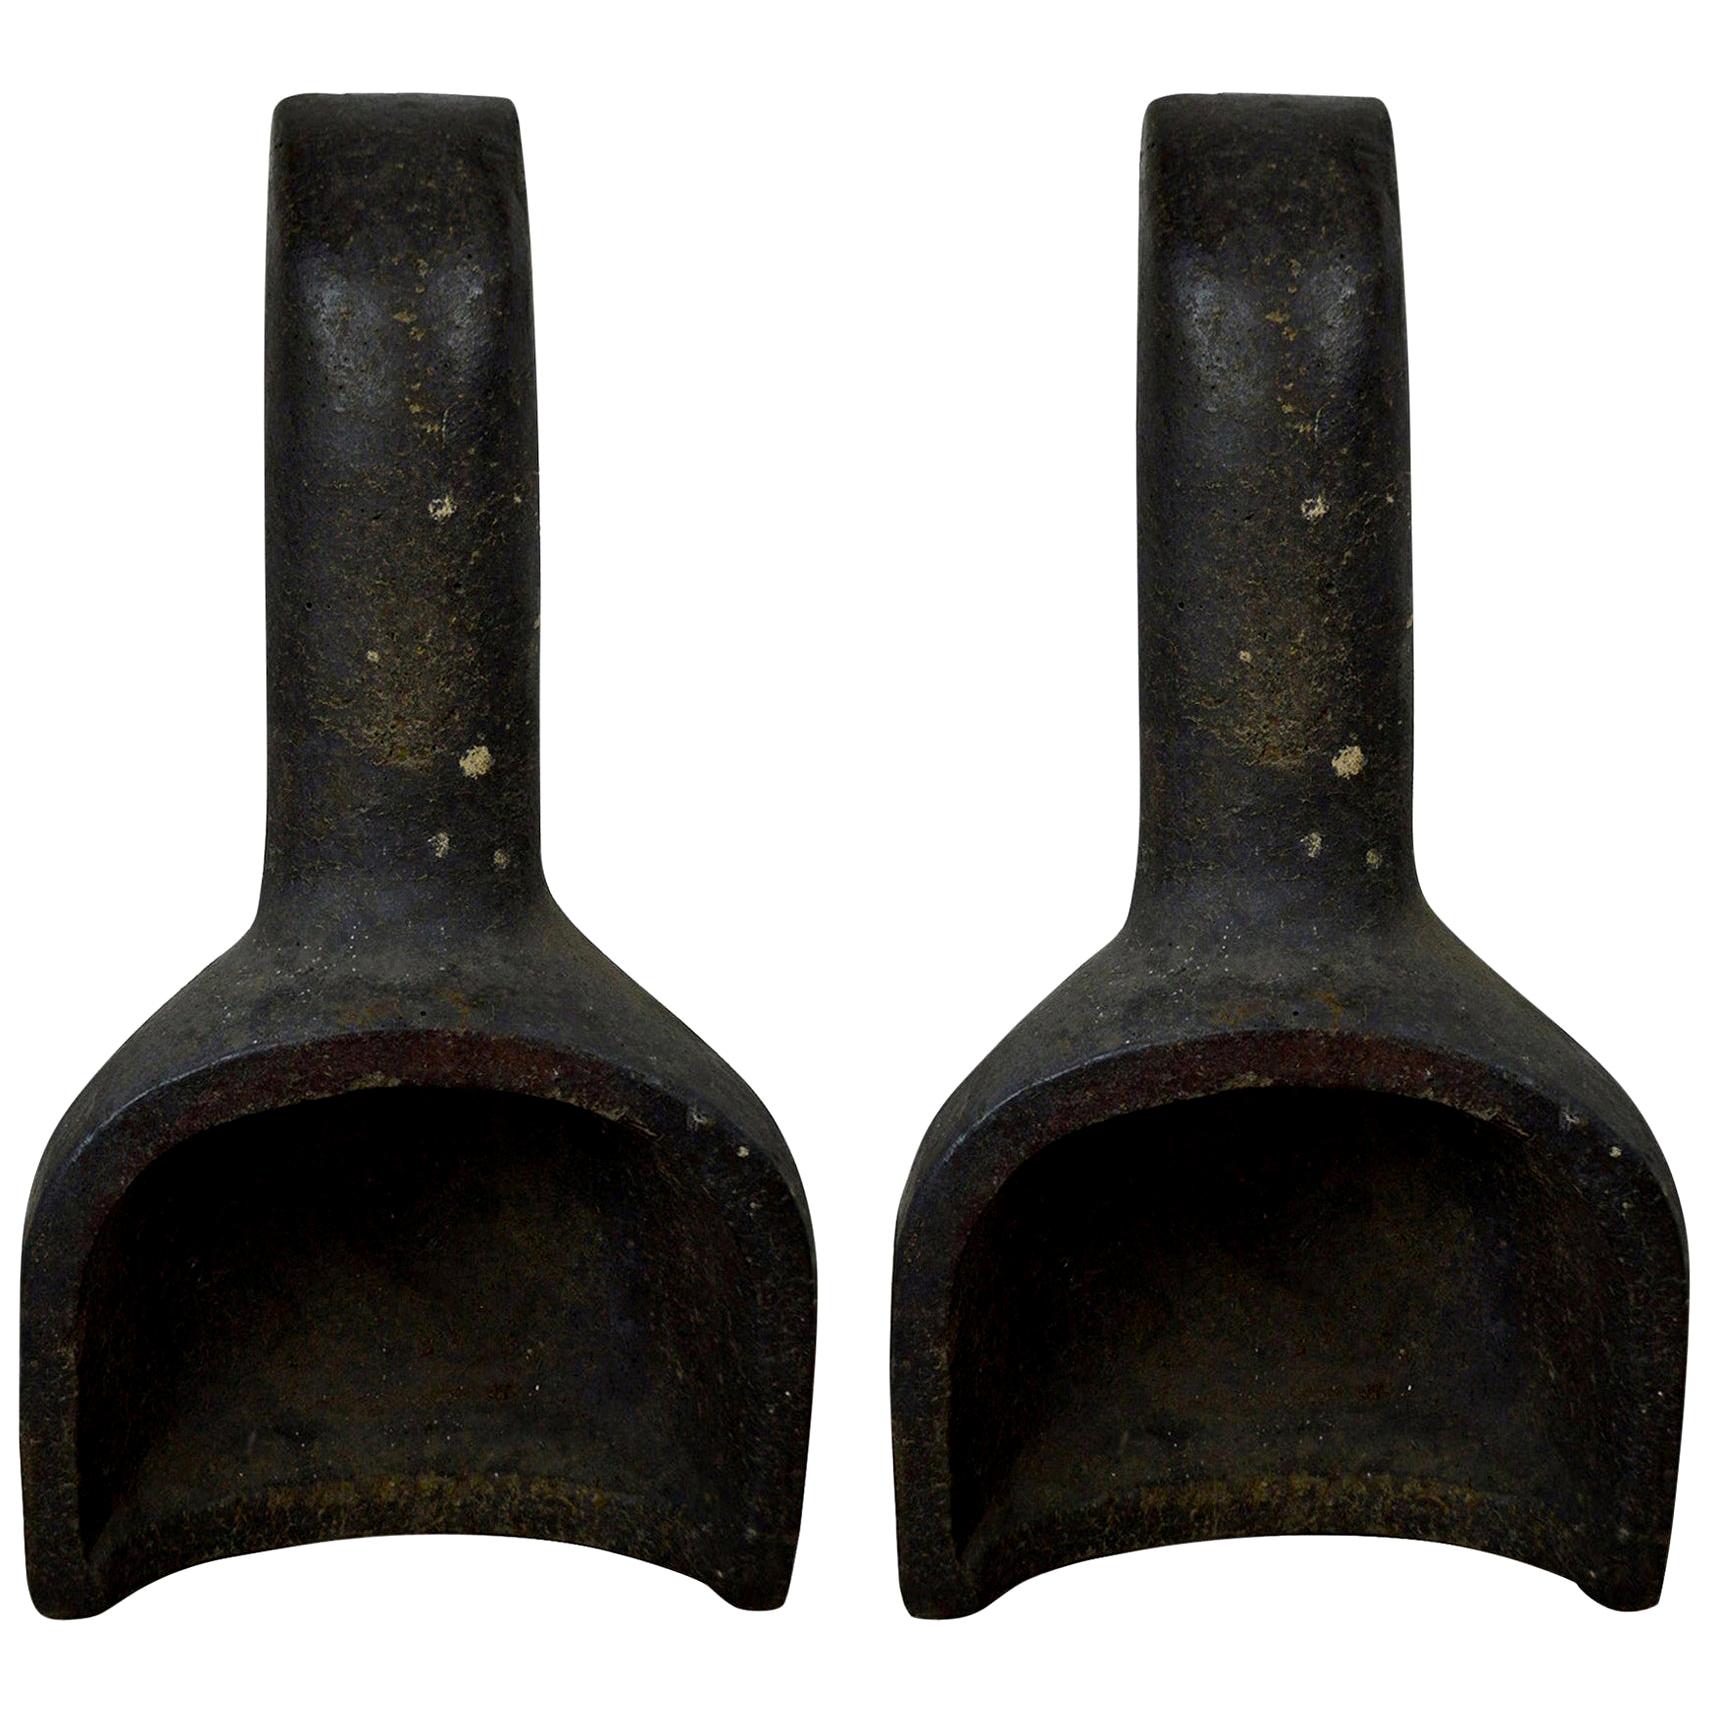 Pair of Stoneware Found Objects, English, circa 1900